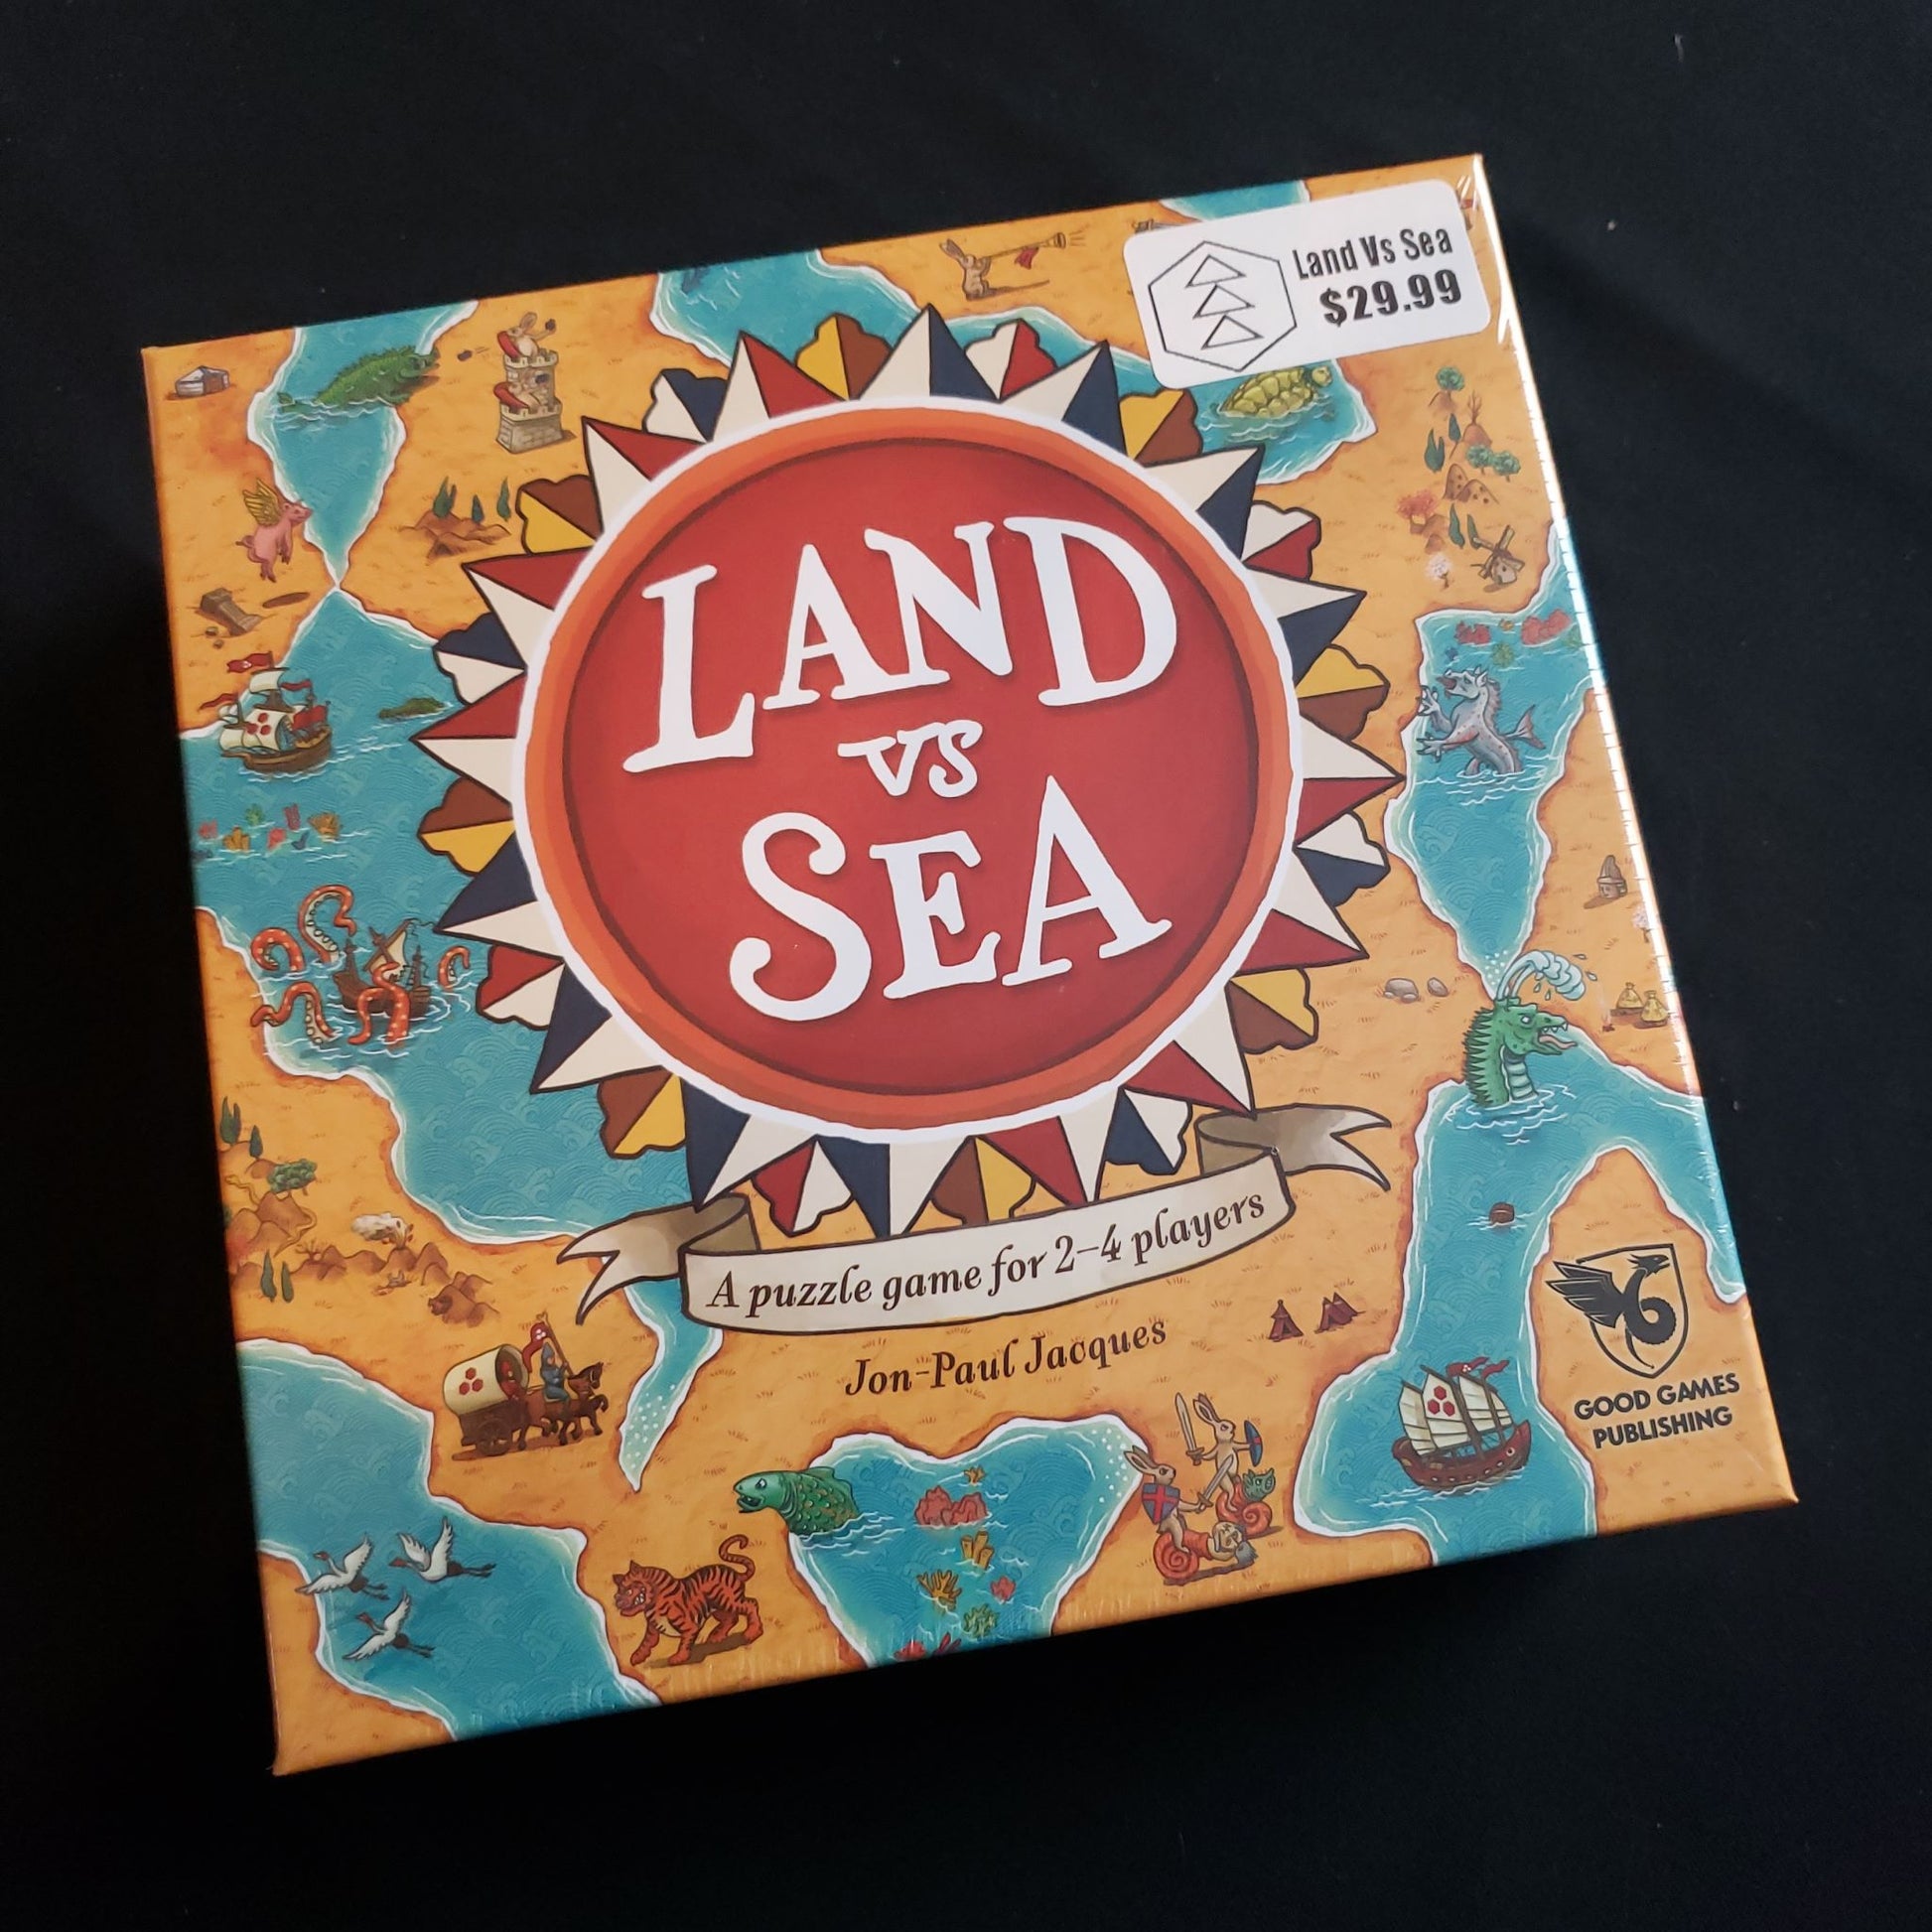 Image shows the front cover of the box of the Land Vs Sea board game